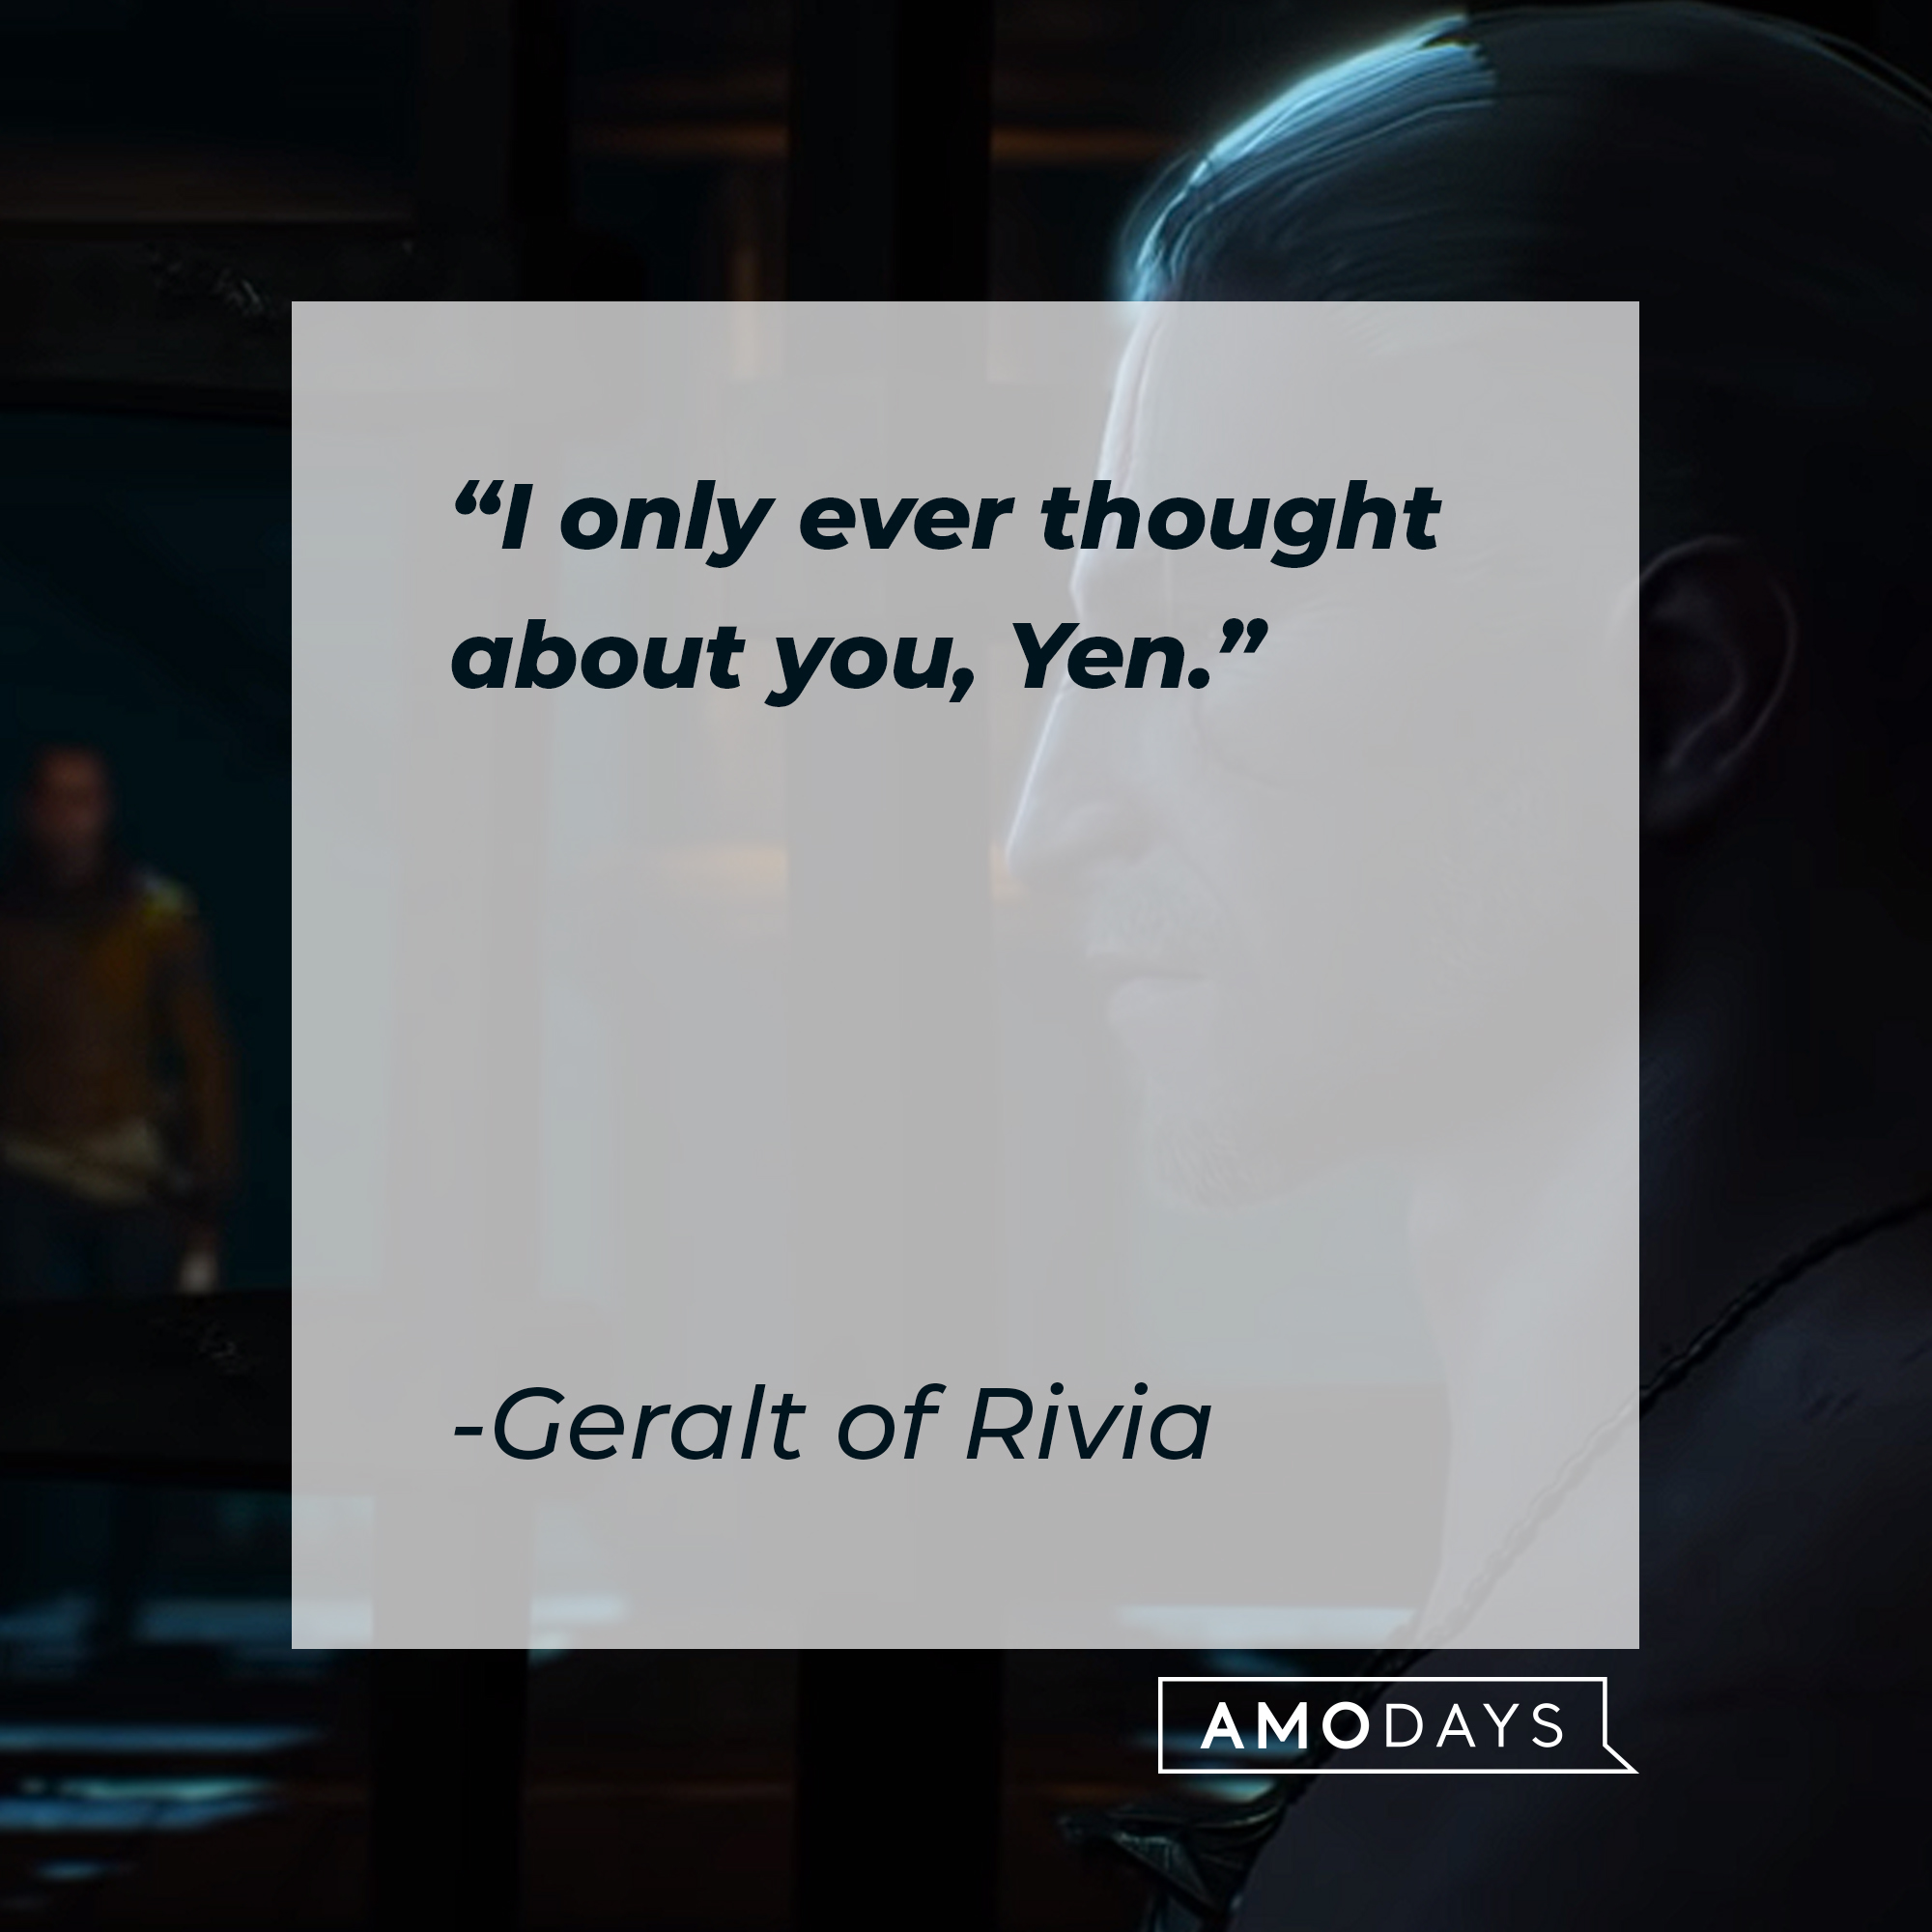 Geralt of Rivia from the video game with his quote: “I only ever thought about you, Yen.” | Source: youtube.com/thewitcher